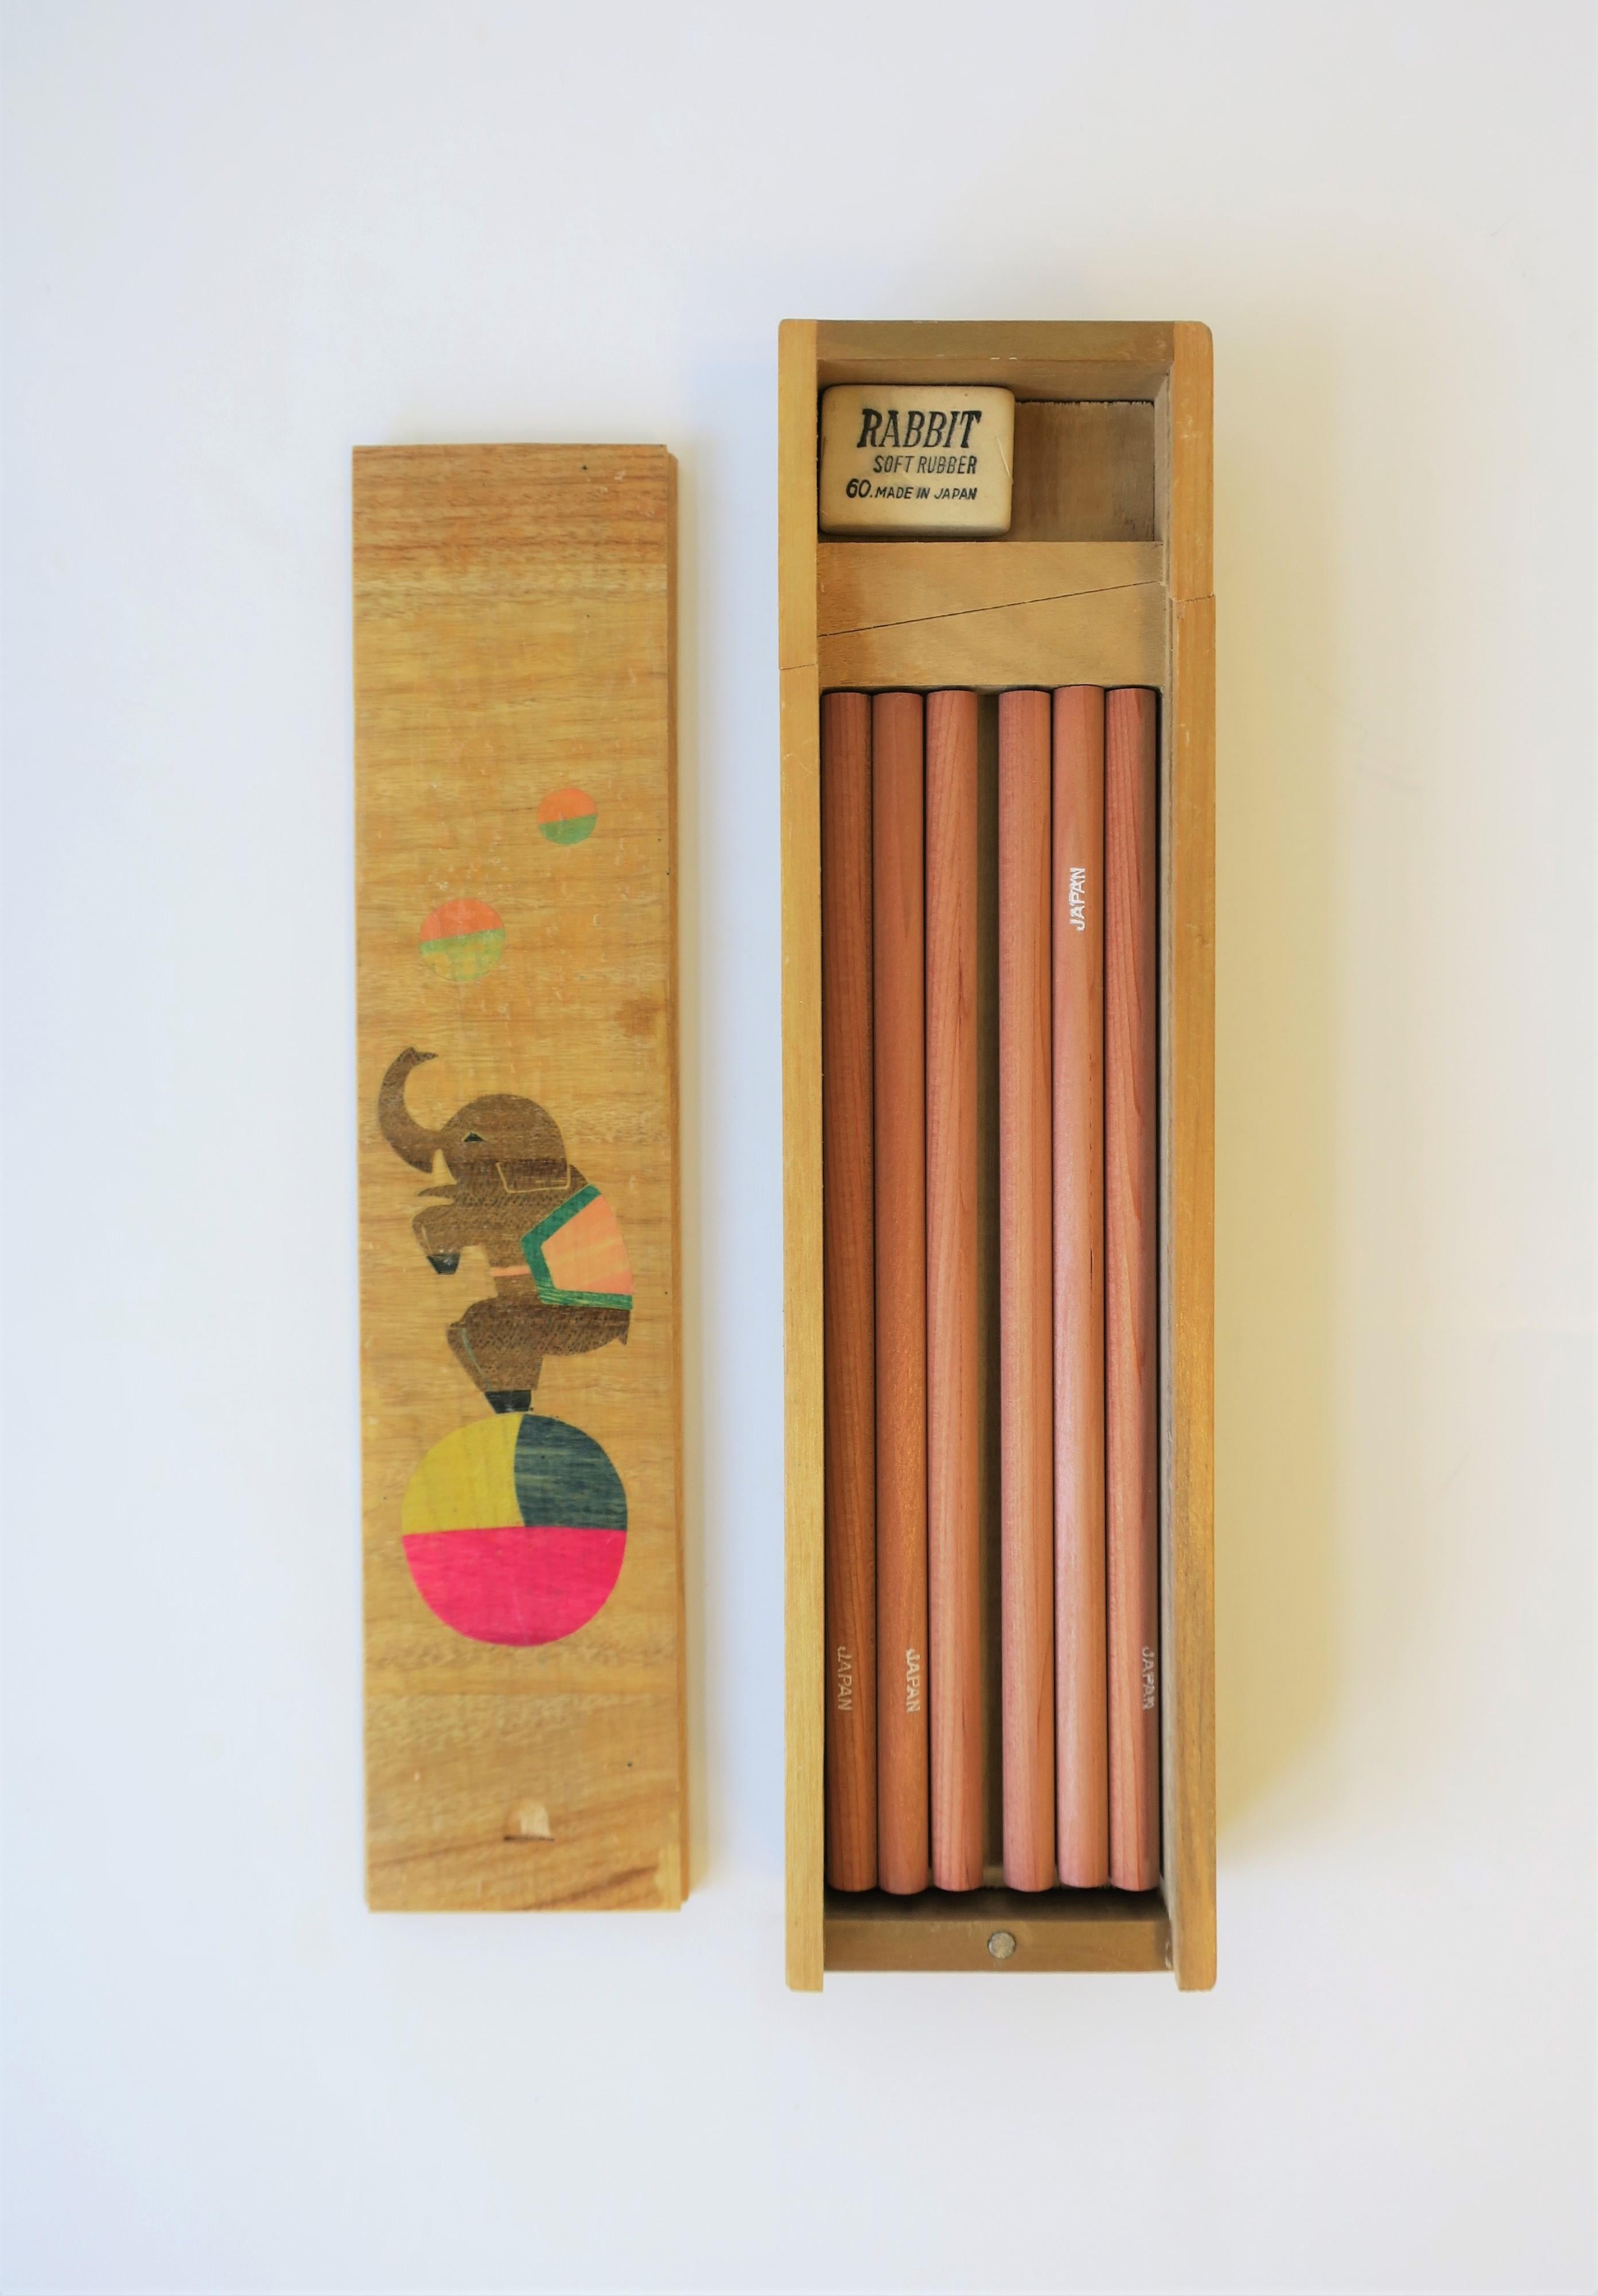 20th Century Japanese Boxed Pencil Set with Elephant and Ball Design